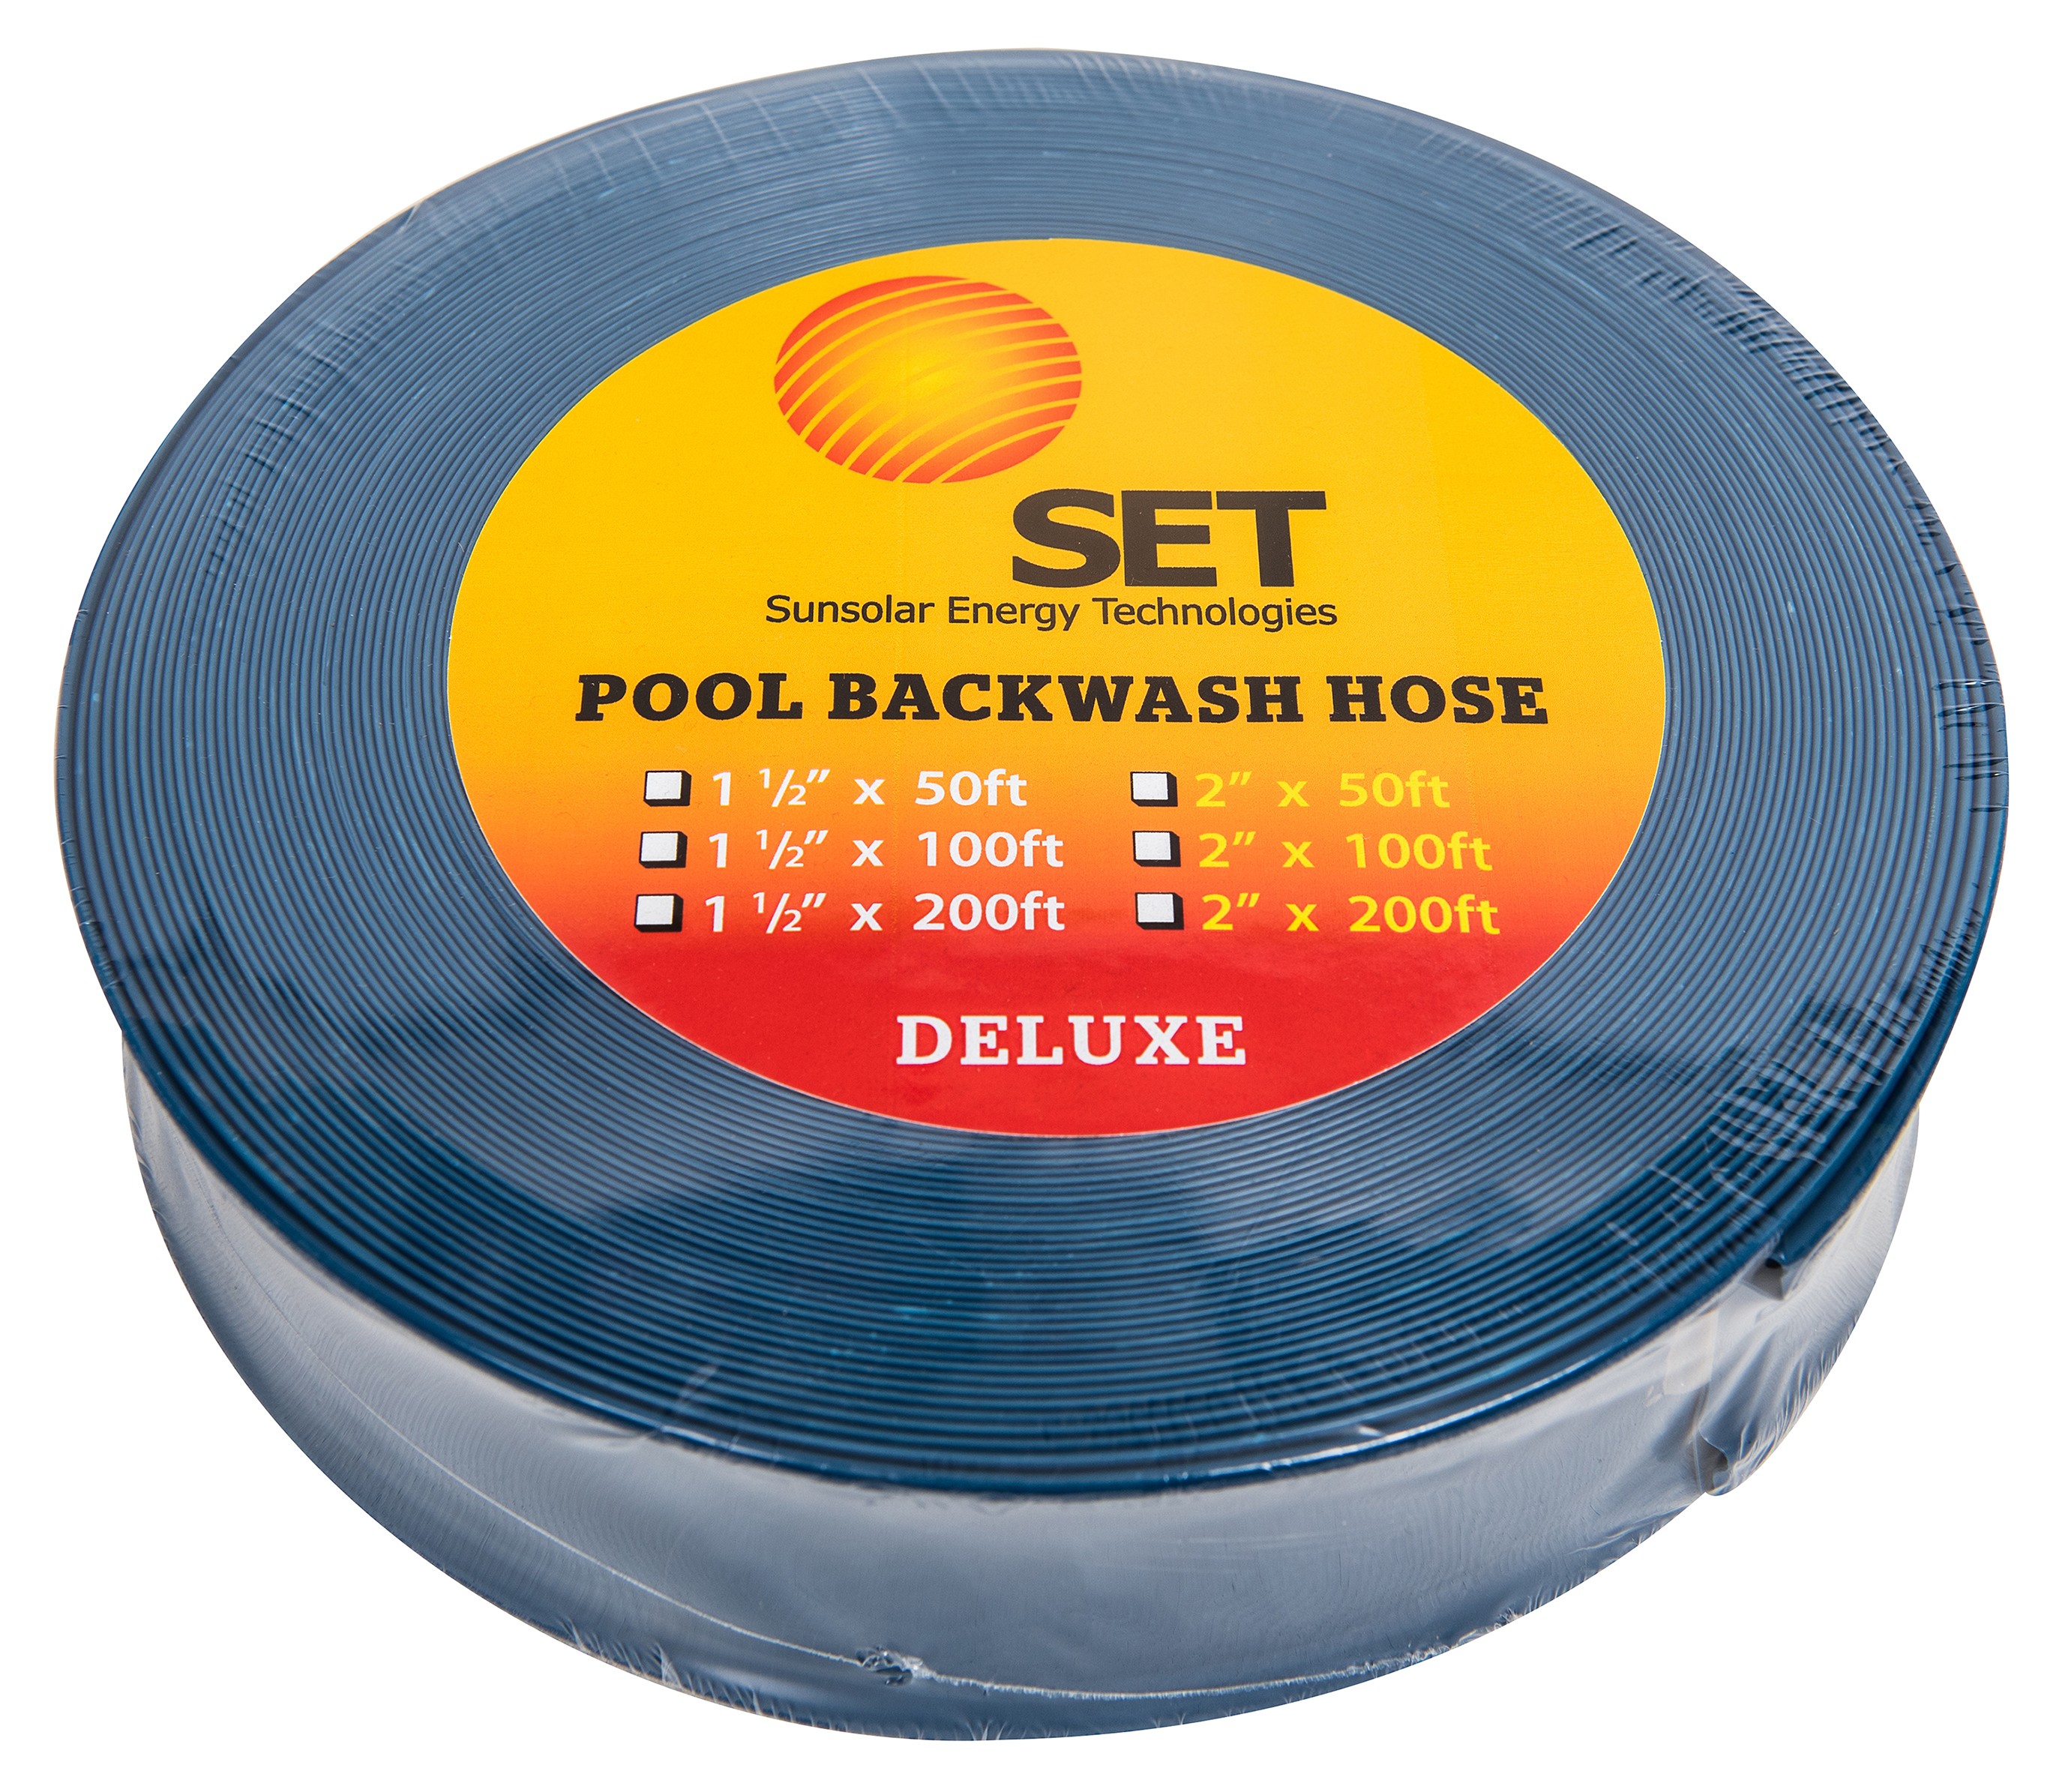 Heavy Duty Deluxe 2'' Backwater Hose for Swimming Pools - 100ft long